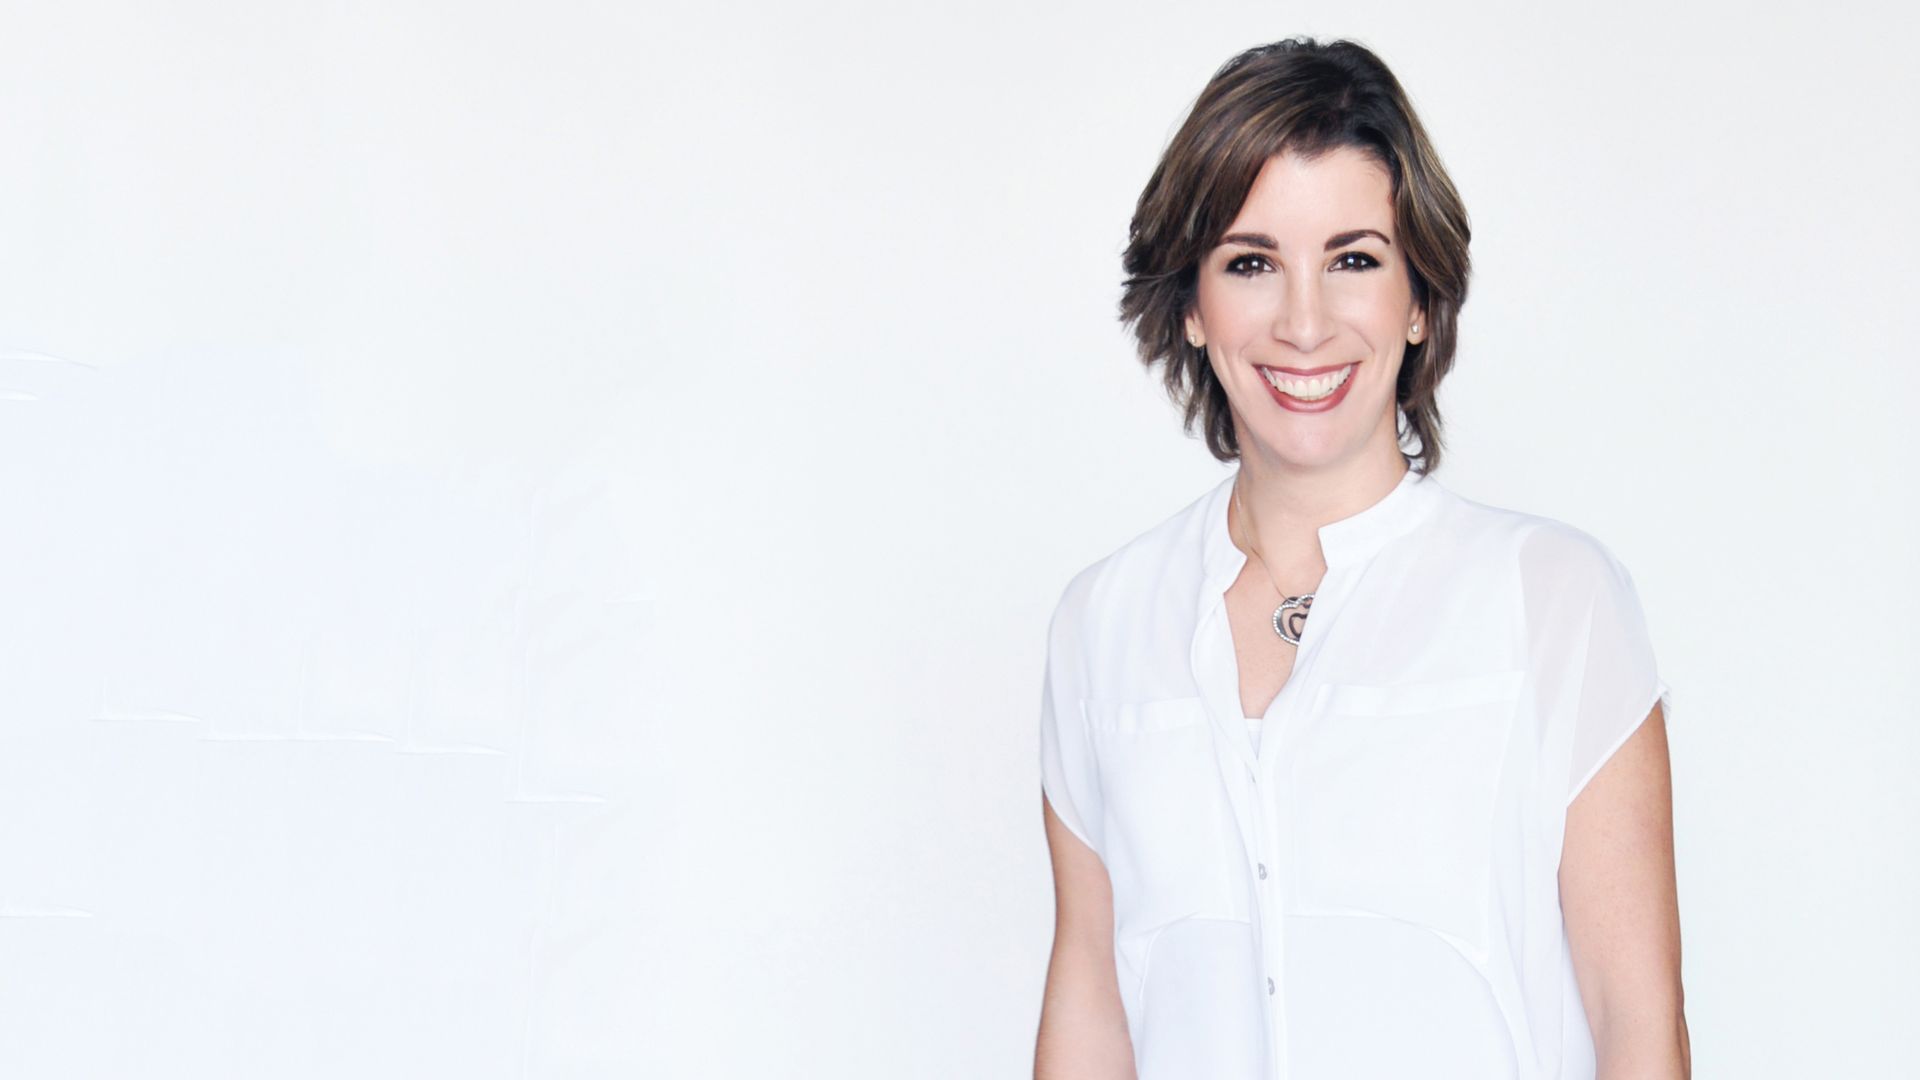 Andreina Pradas smiles brightly while wearing a bright white shirt against a white background. 